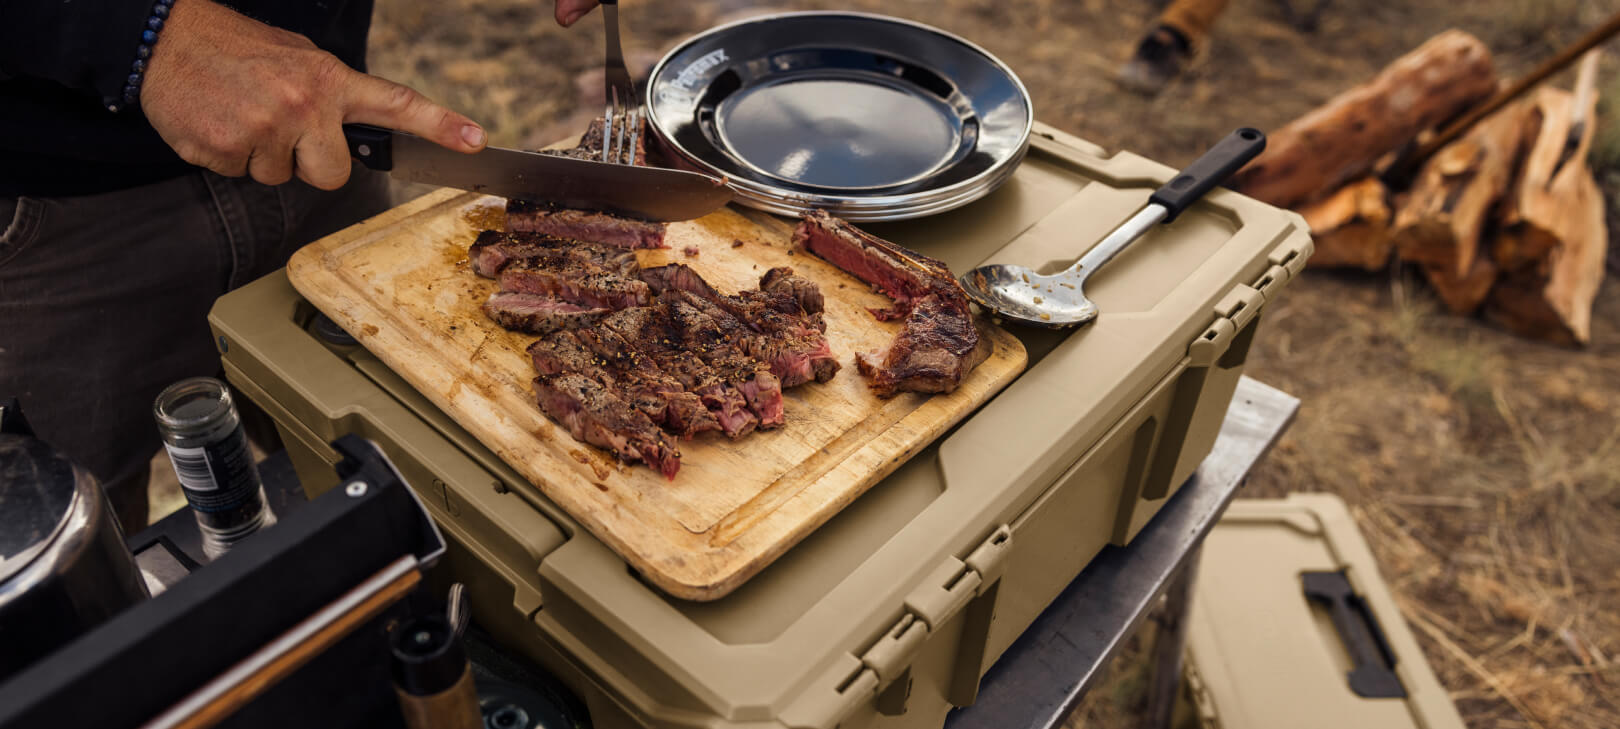 Tan Halfrack 32 being used as a platform for cutting steak while camping